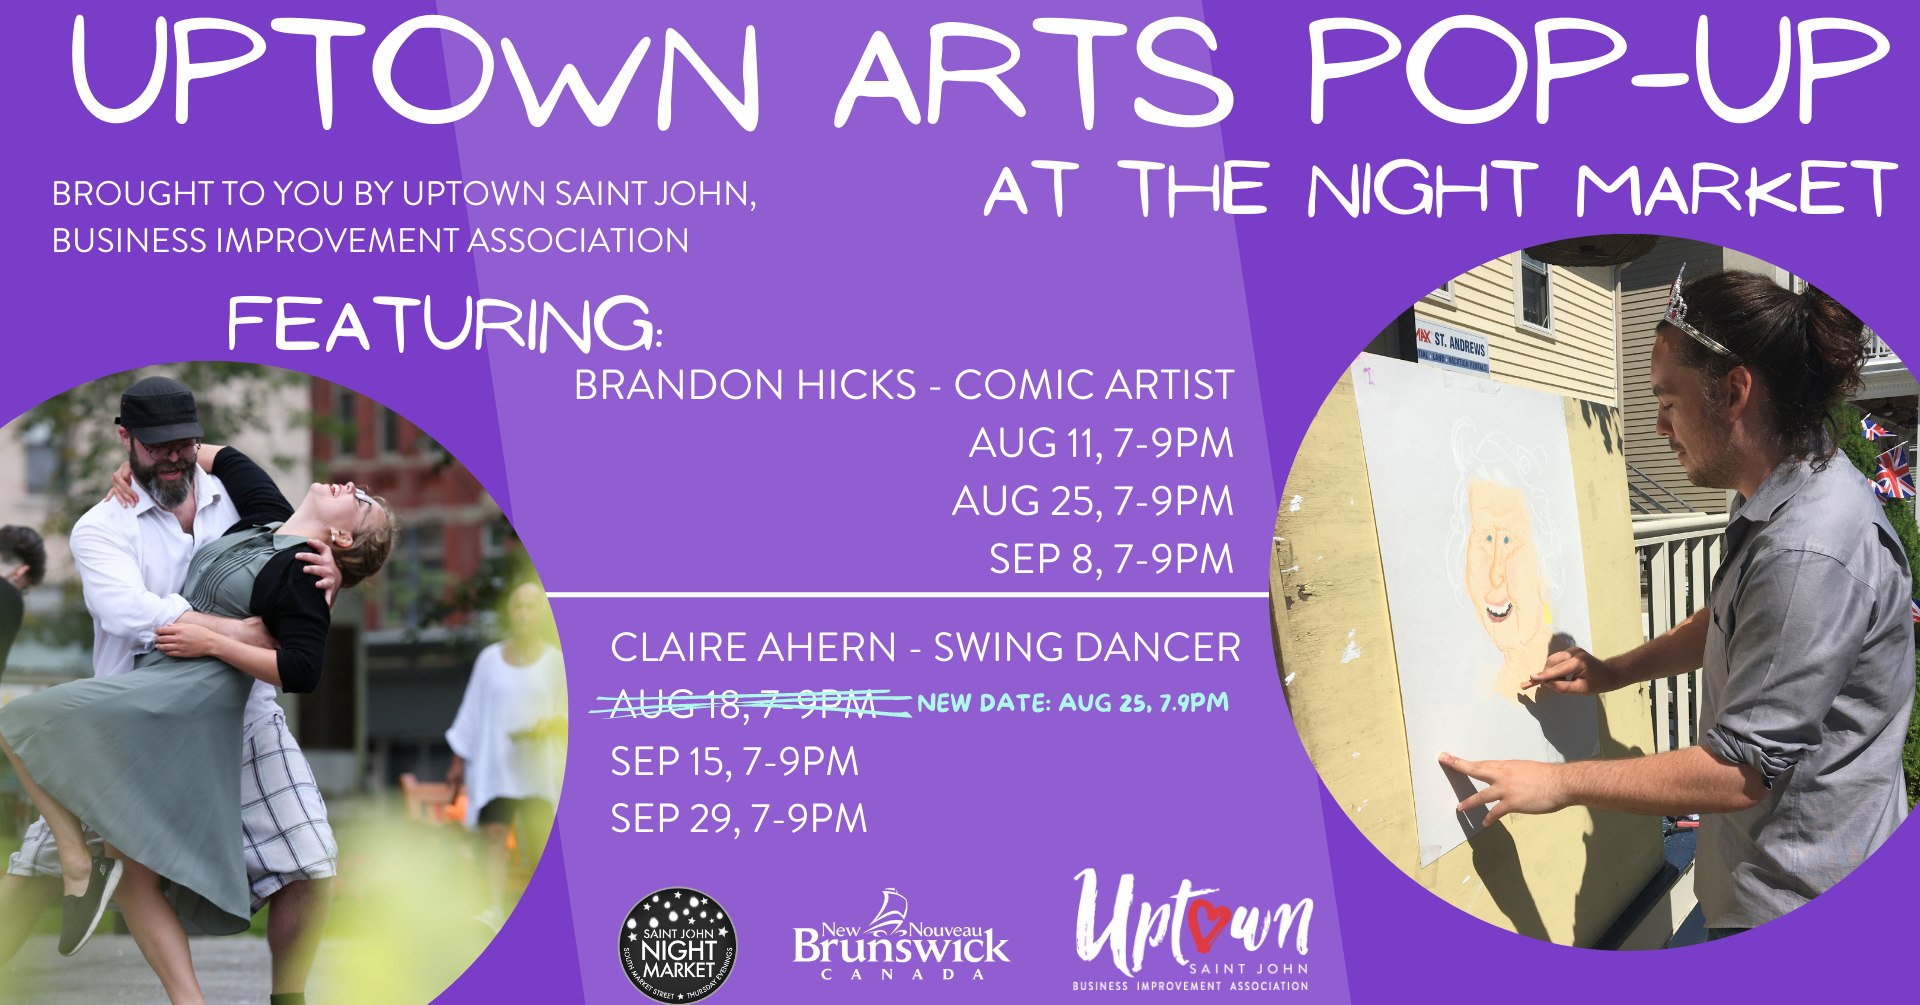 Image of Claire Ahern dancing with a partner and of Brandon Hicks drawing a cartoon. Text reads Uptown Arts Pop-up at the Night Market. Brought to you by Uptown Saint John, Business Improvement Association. Featuring Brandon Hicks, Comic Artist. Aug 11, 7-9pm, Aug 25, 7-9pm, Sept 8, 7-9pm. Claire Ahern, Swing Dancer, Aug 25, 7-9pm, Sept 15, 7-9pm, Sept 29, 7-9pm.